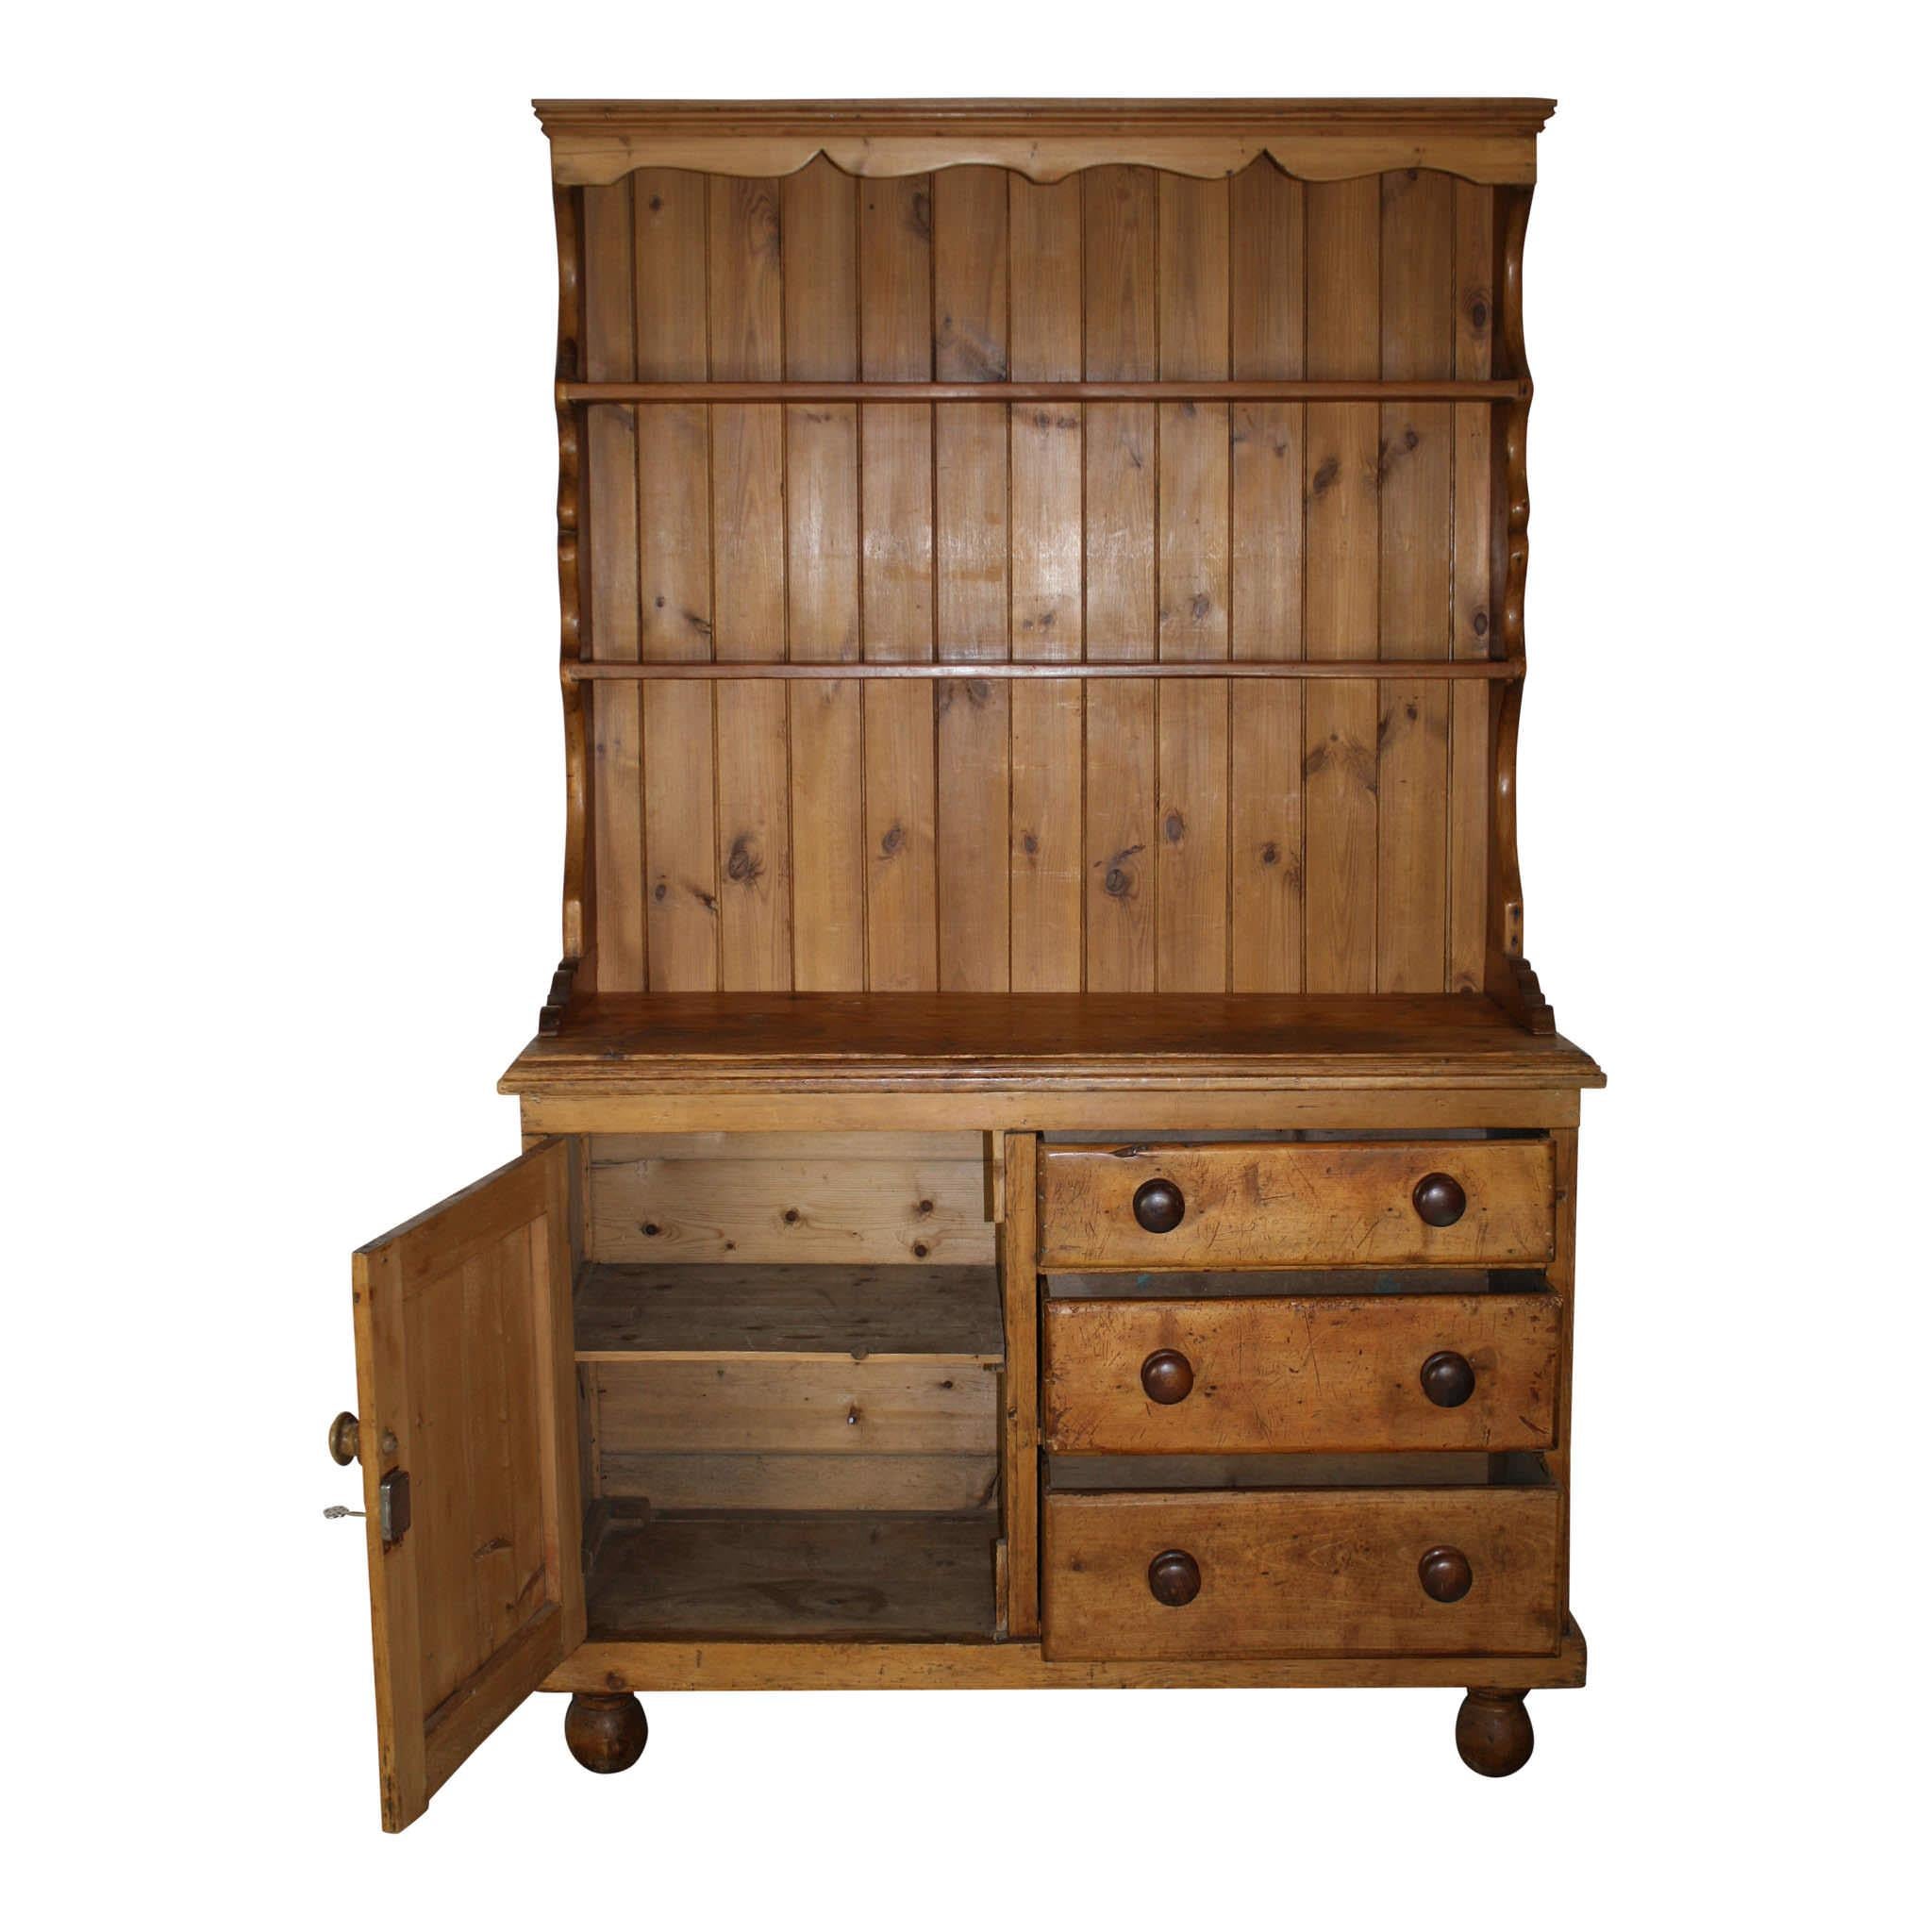 Comprised of two plate rack shelves, three drawers, and a door that opens to a single shelf, this charming pine cupboard provides practical storage and a set back display. The upper piece, which can be removed from the lower piece, is framed with a